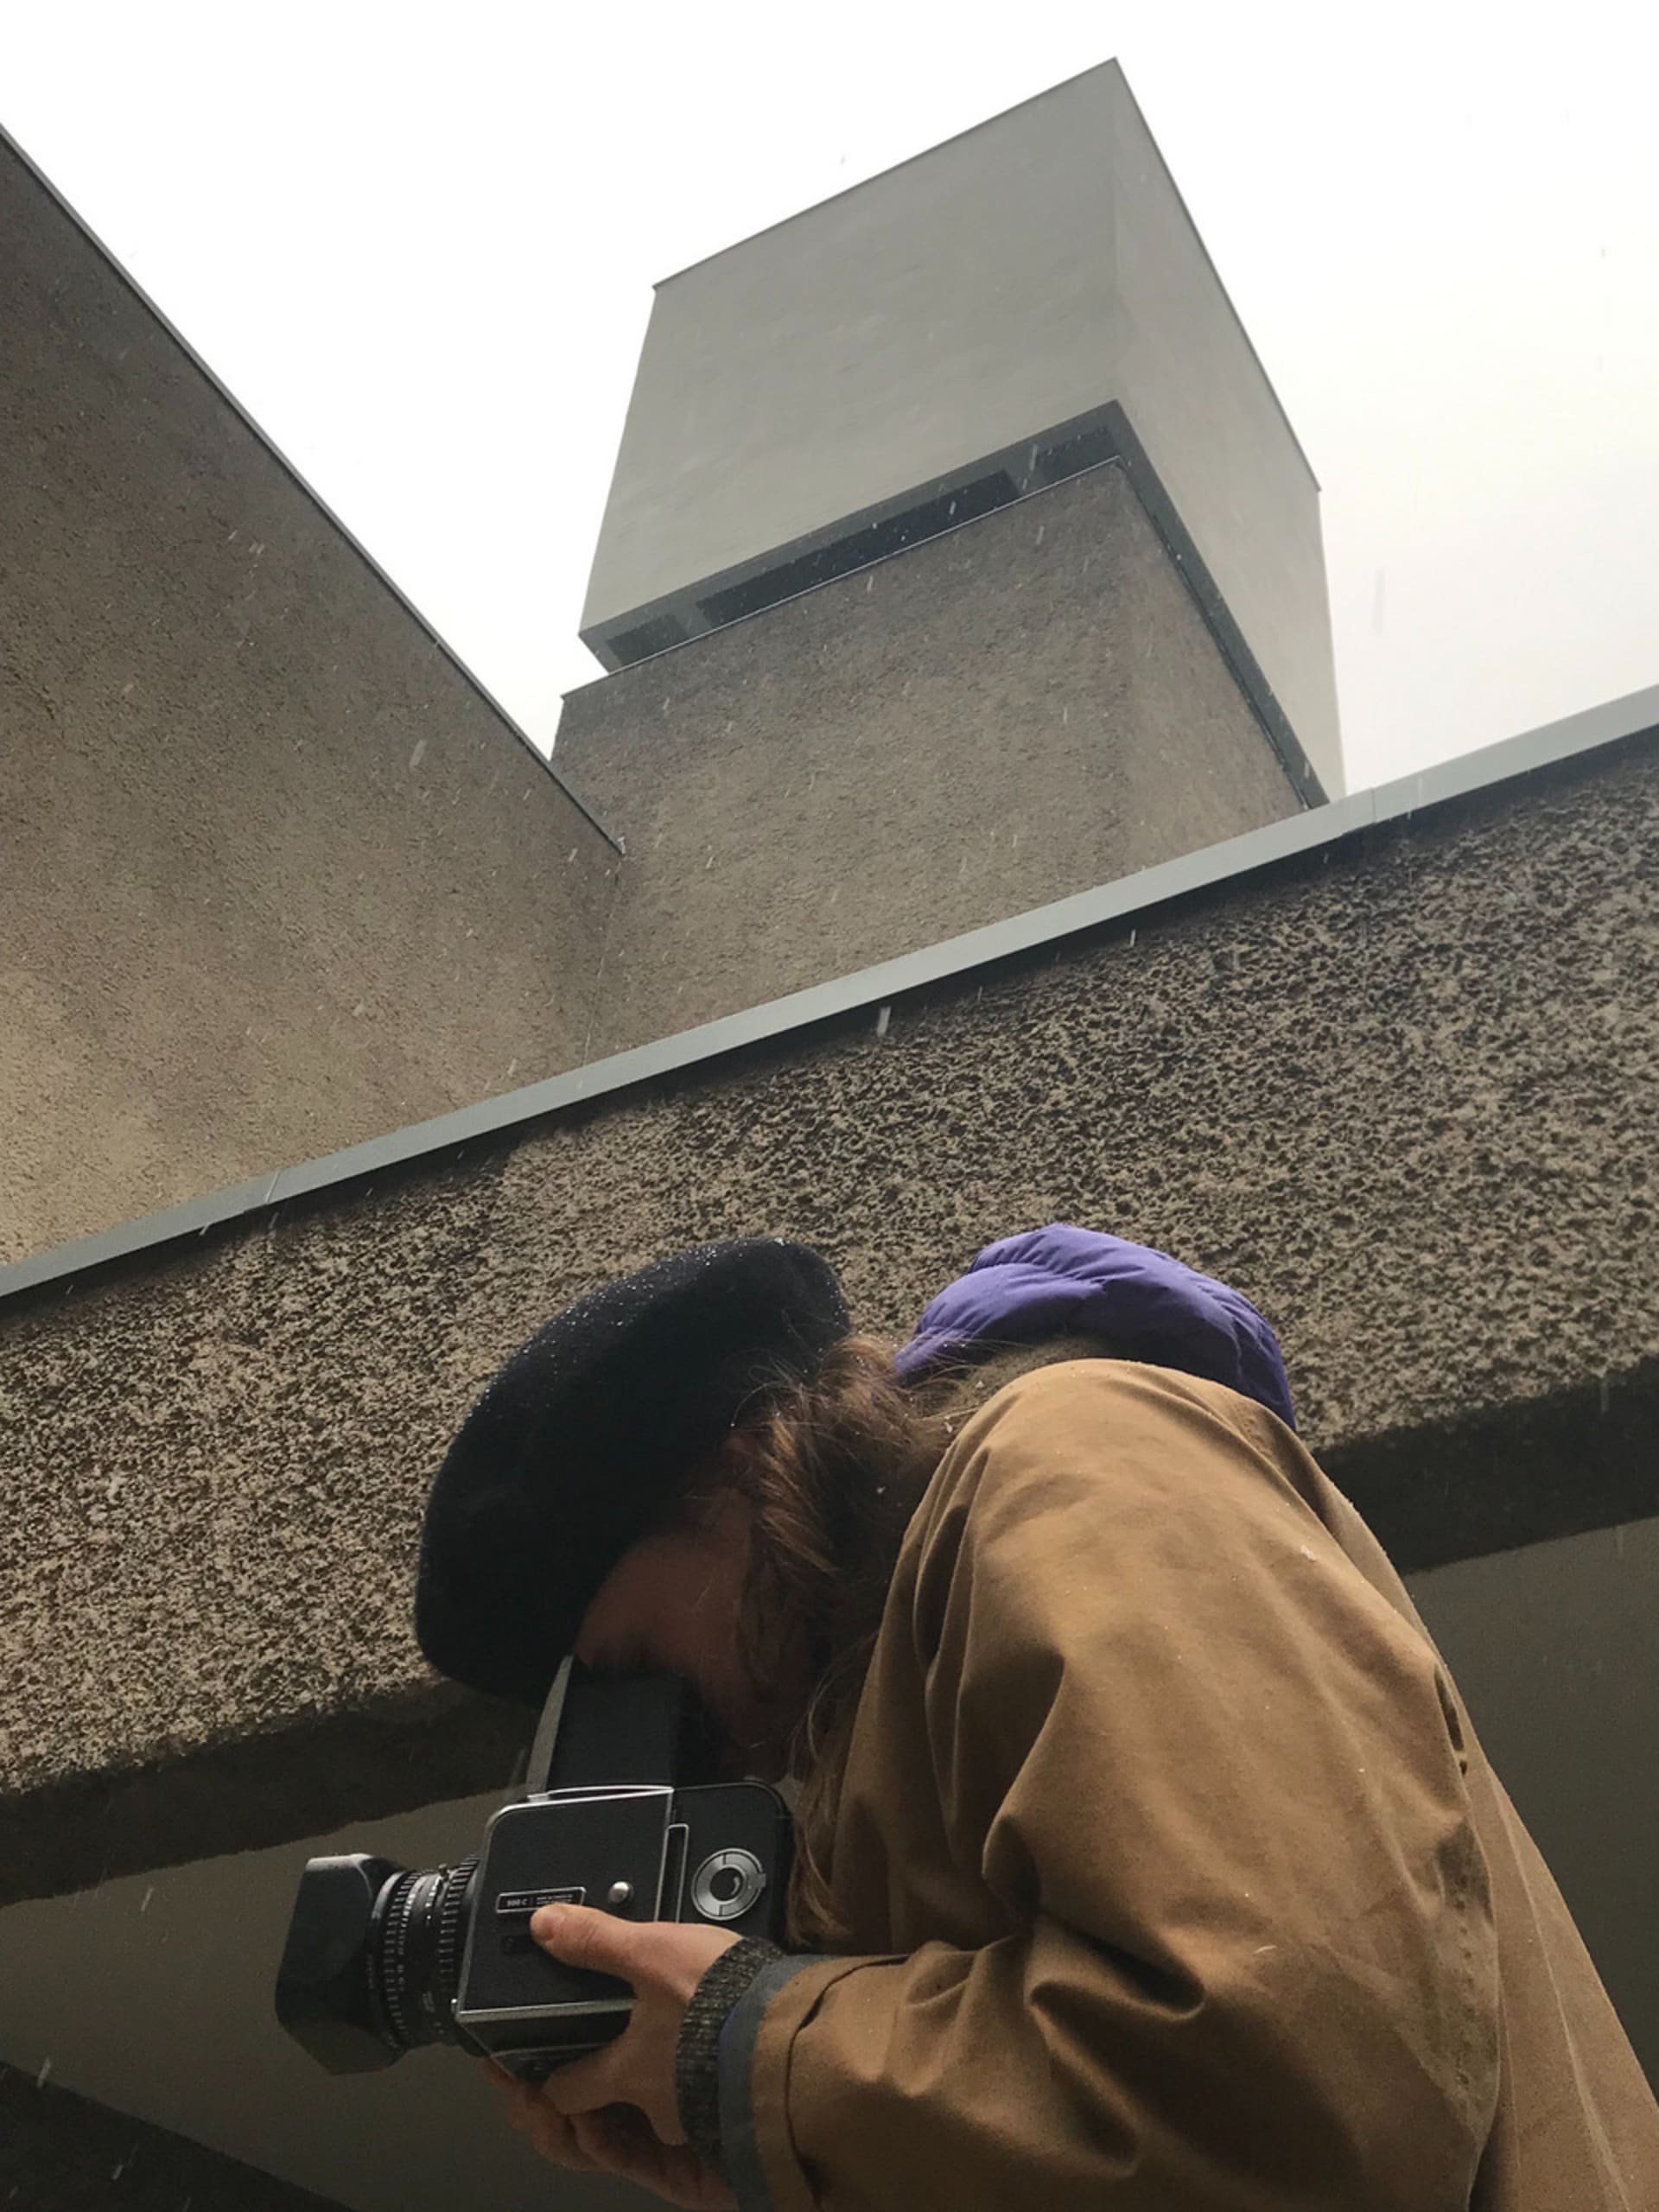 A person taking an image on the analogue camera